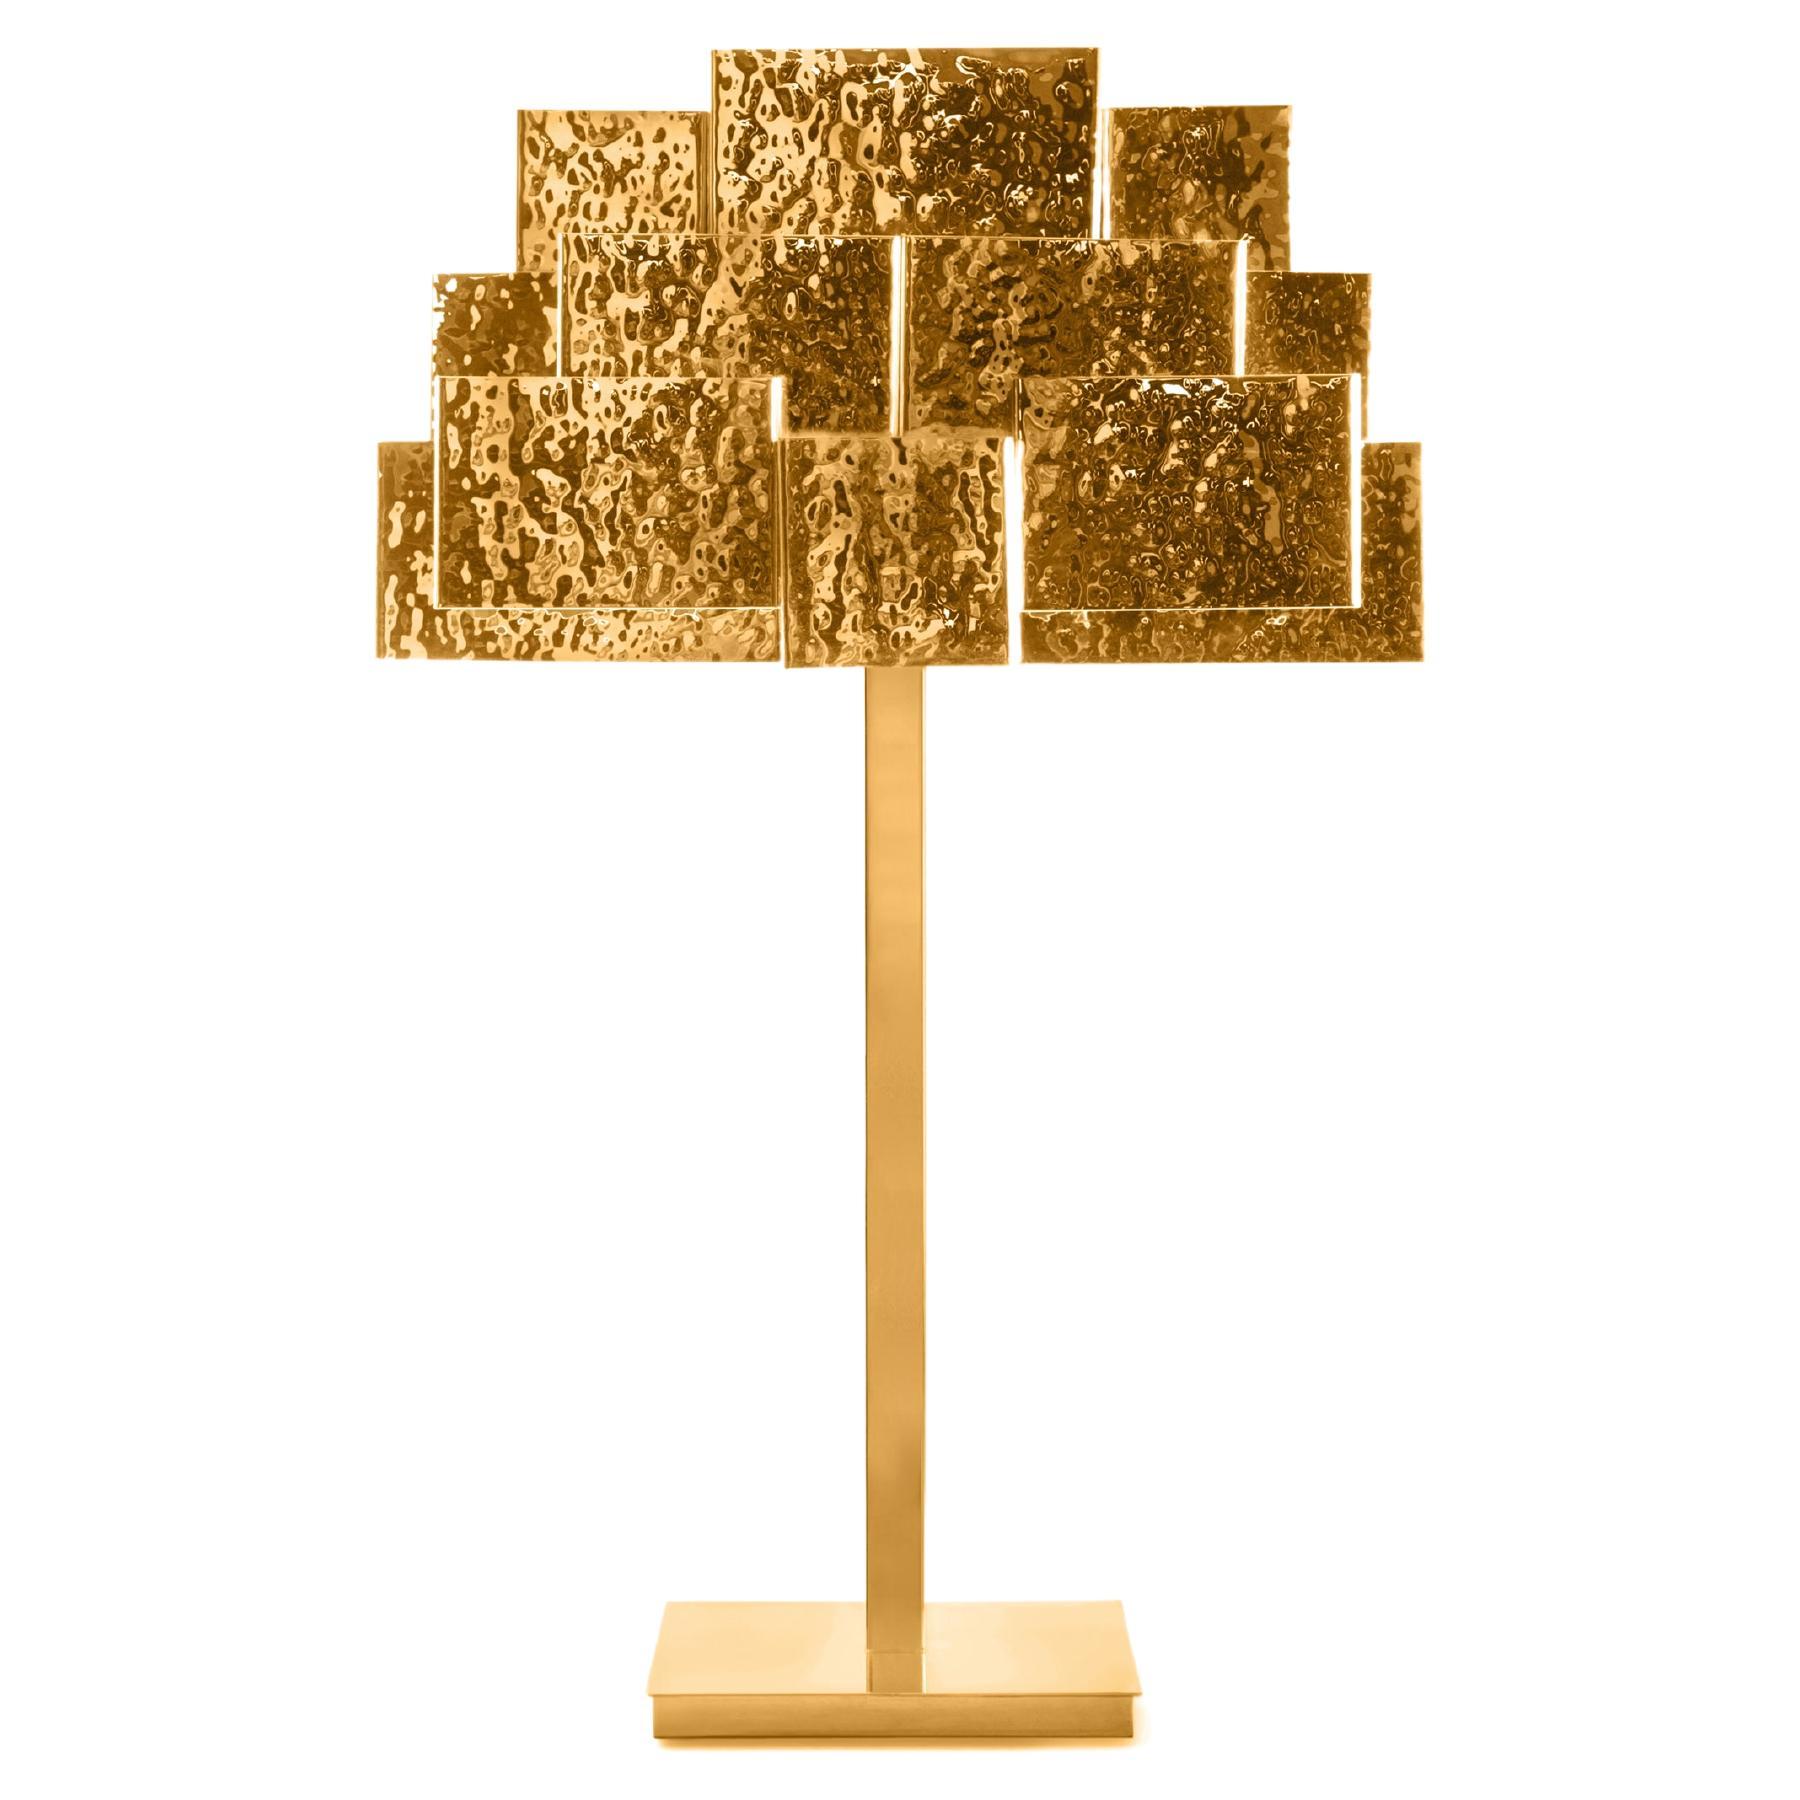 Inspiring Trees Hammered Golden Brass Table Lamp by InsidherLand For Sale